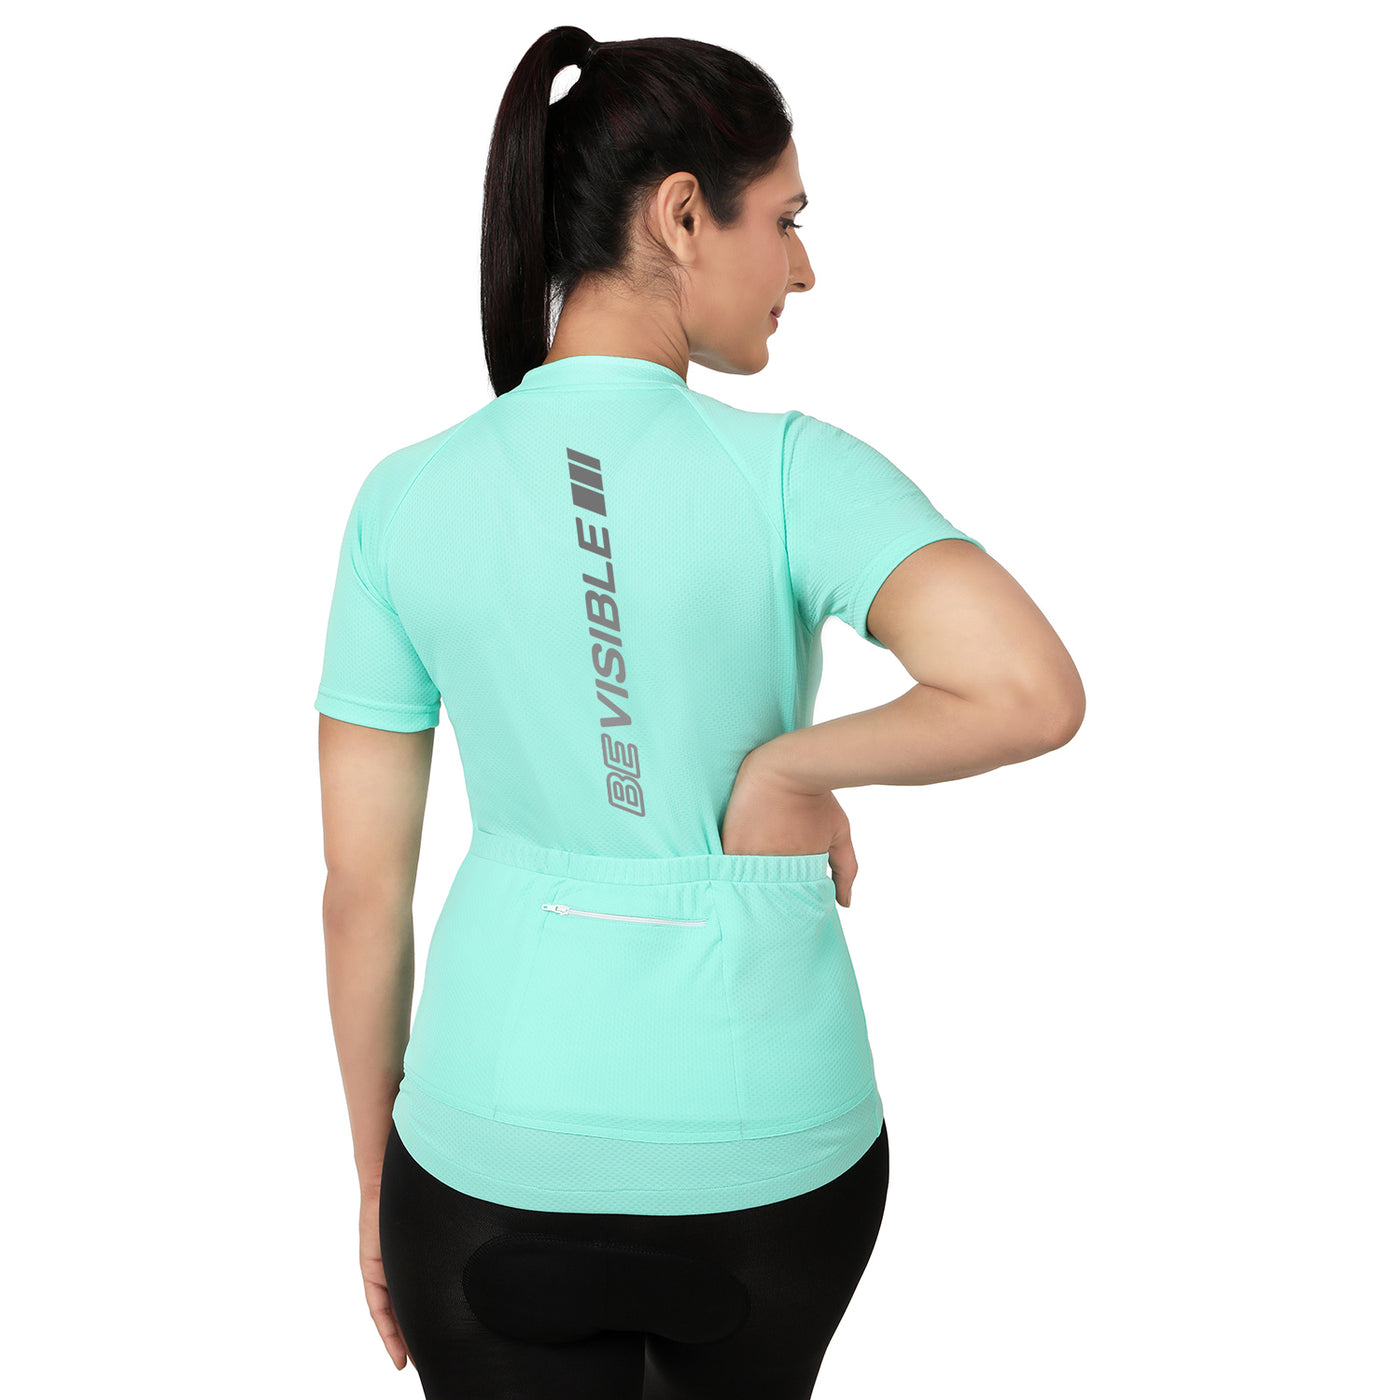 Triquip BeVisible Cycling Jersey Women Half Sleeves - Sea Green - Cyclop.in